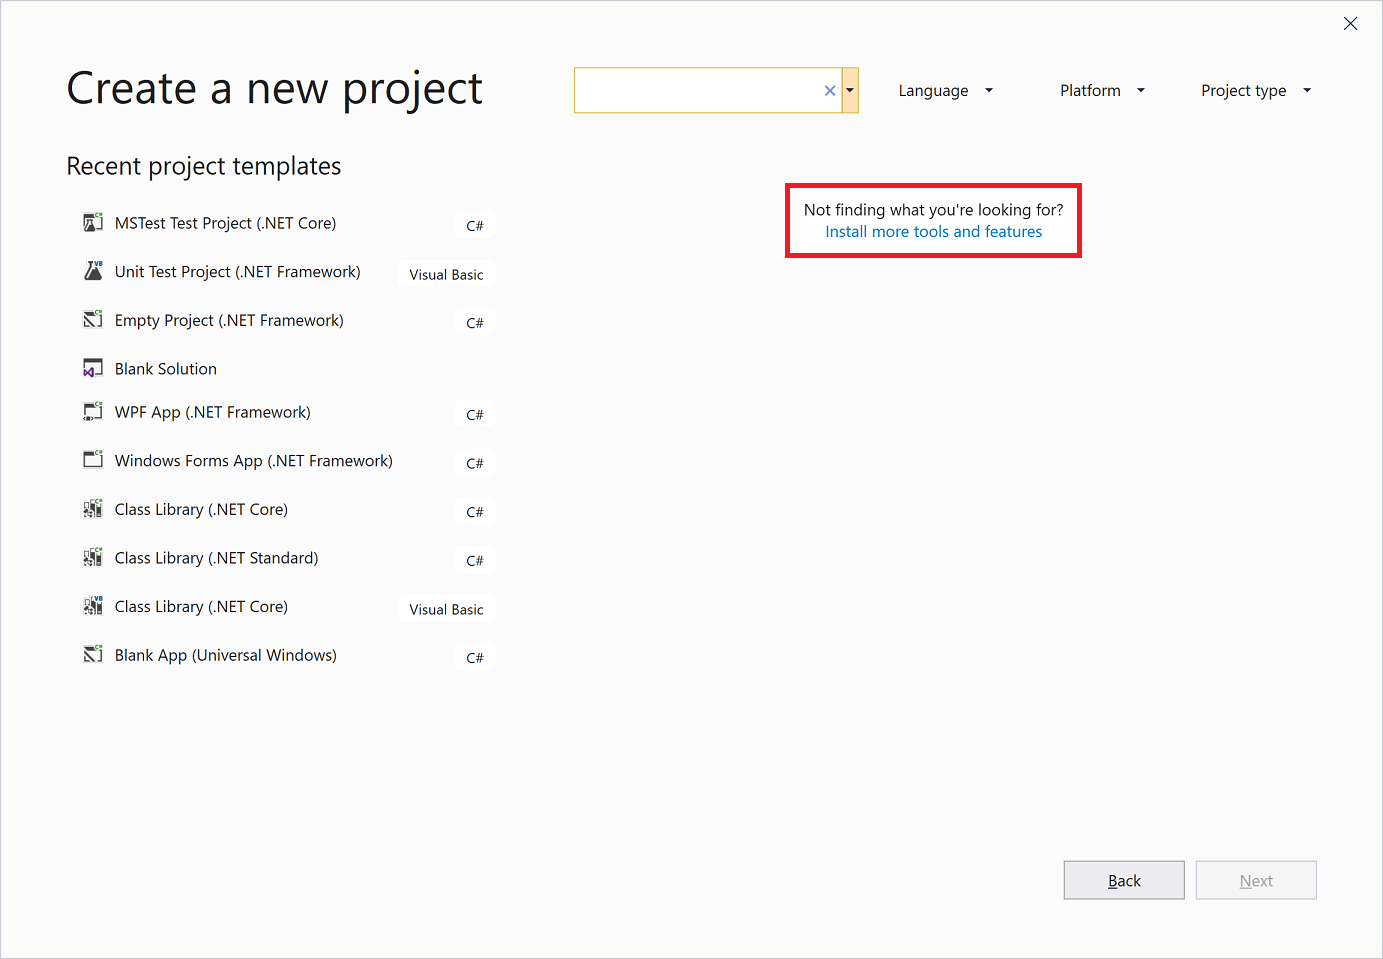 Screenshot showing the Create a new project window with the 'Install more tools and features' link highlighted.